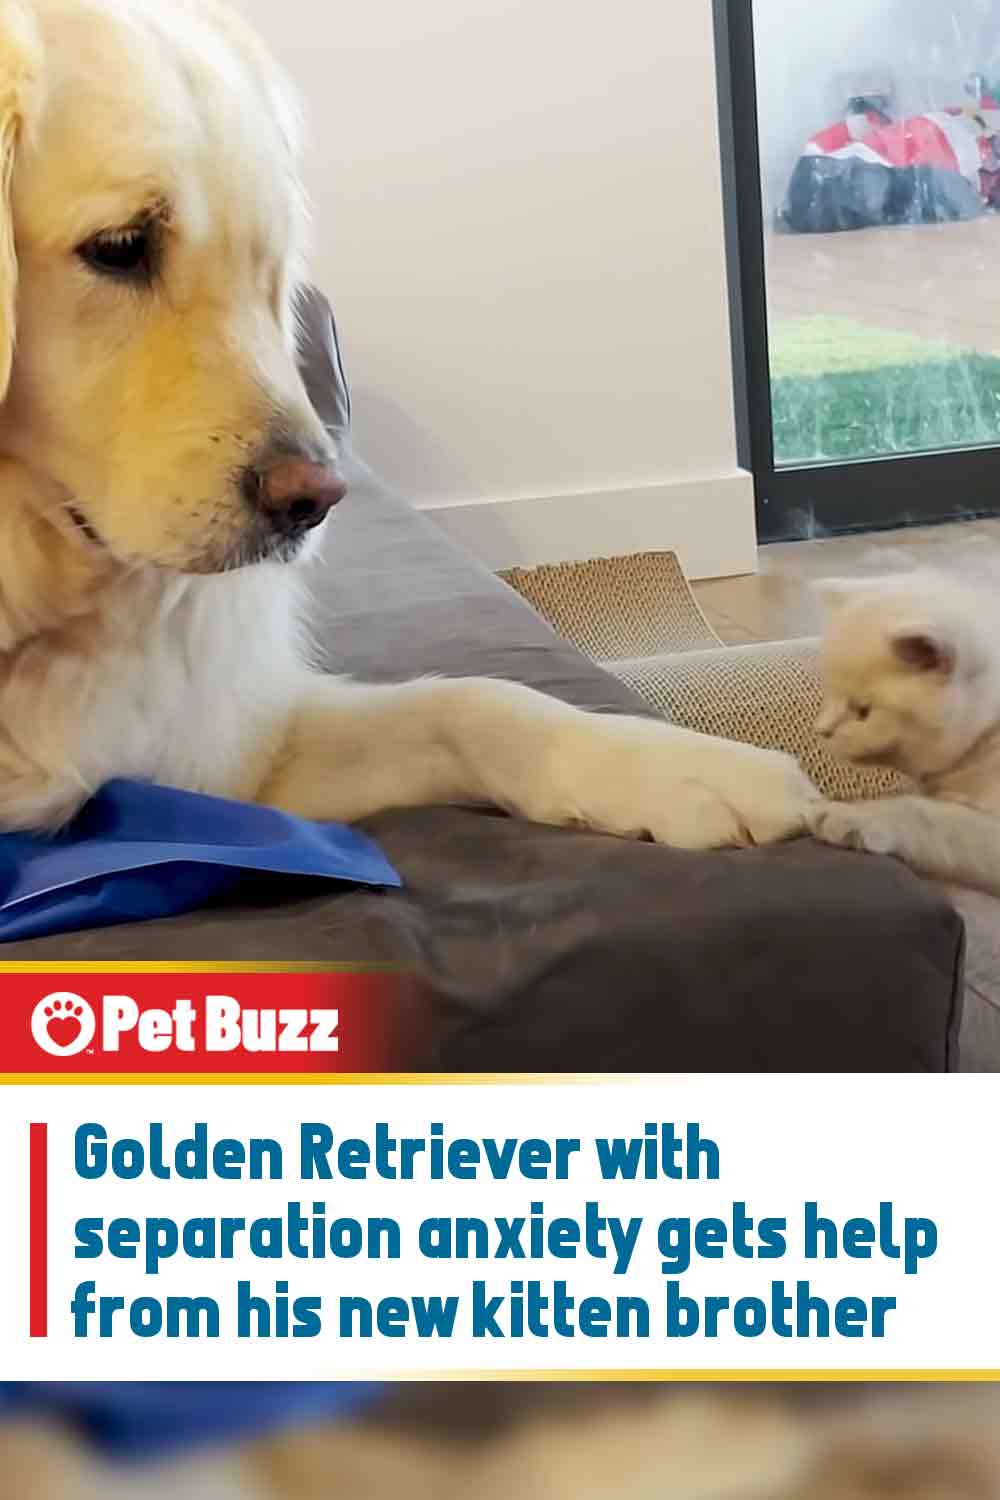 Golden Retriever with separation anxiety gets help from his new kitten brother